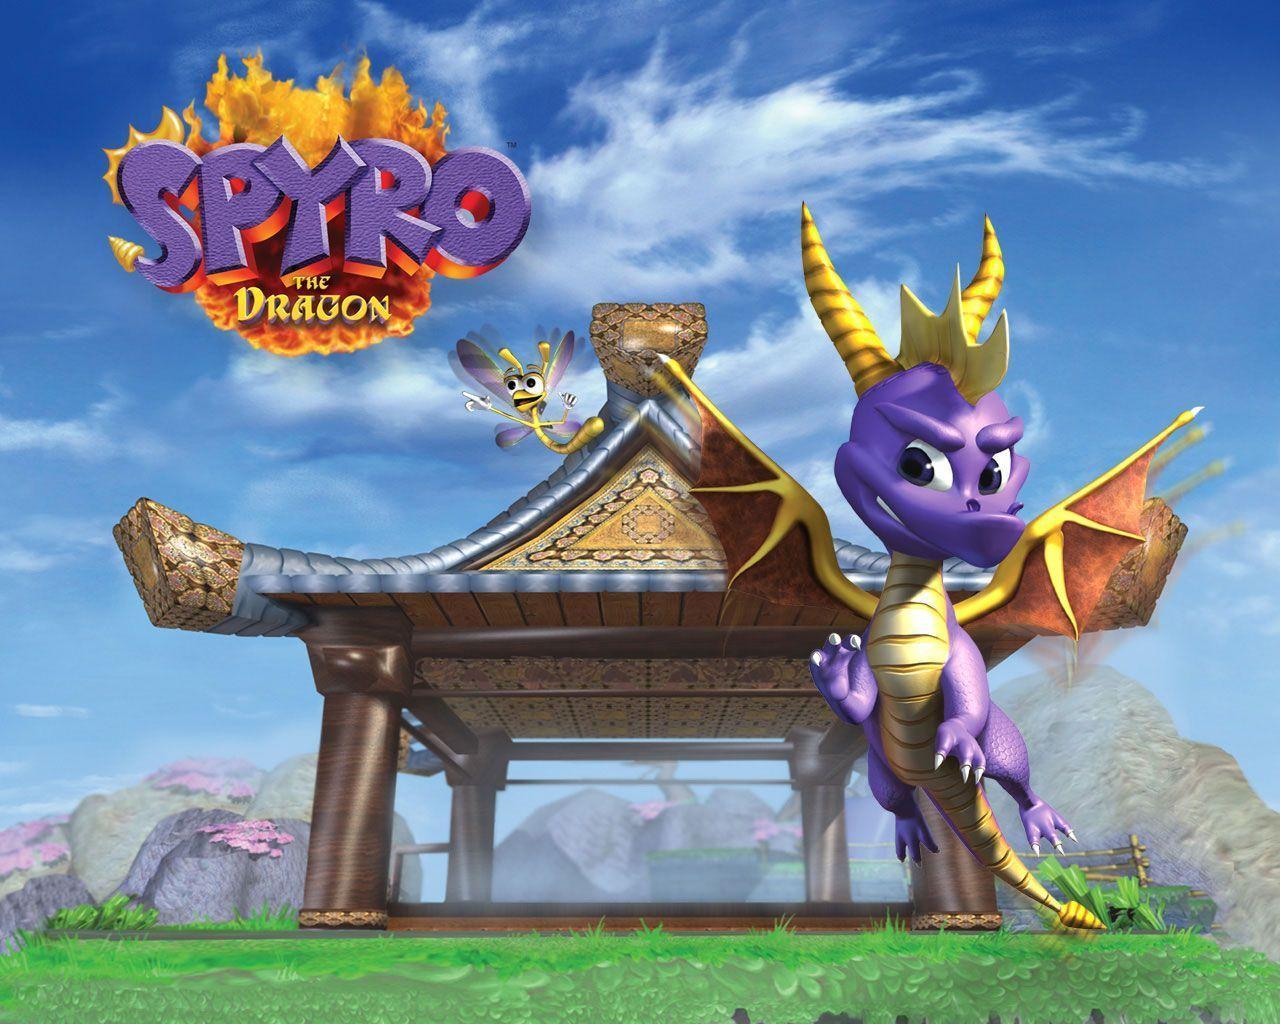 spyro enter the dragonfly ps4